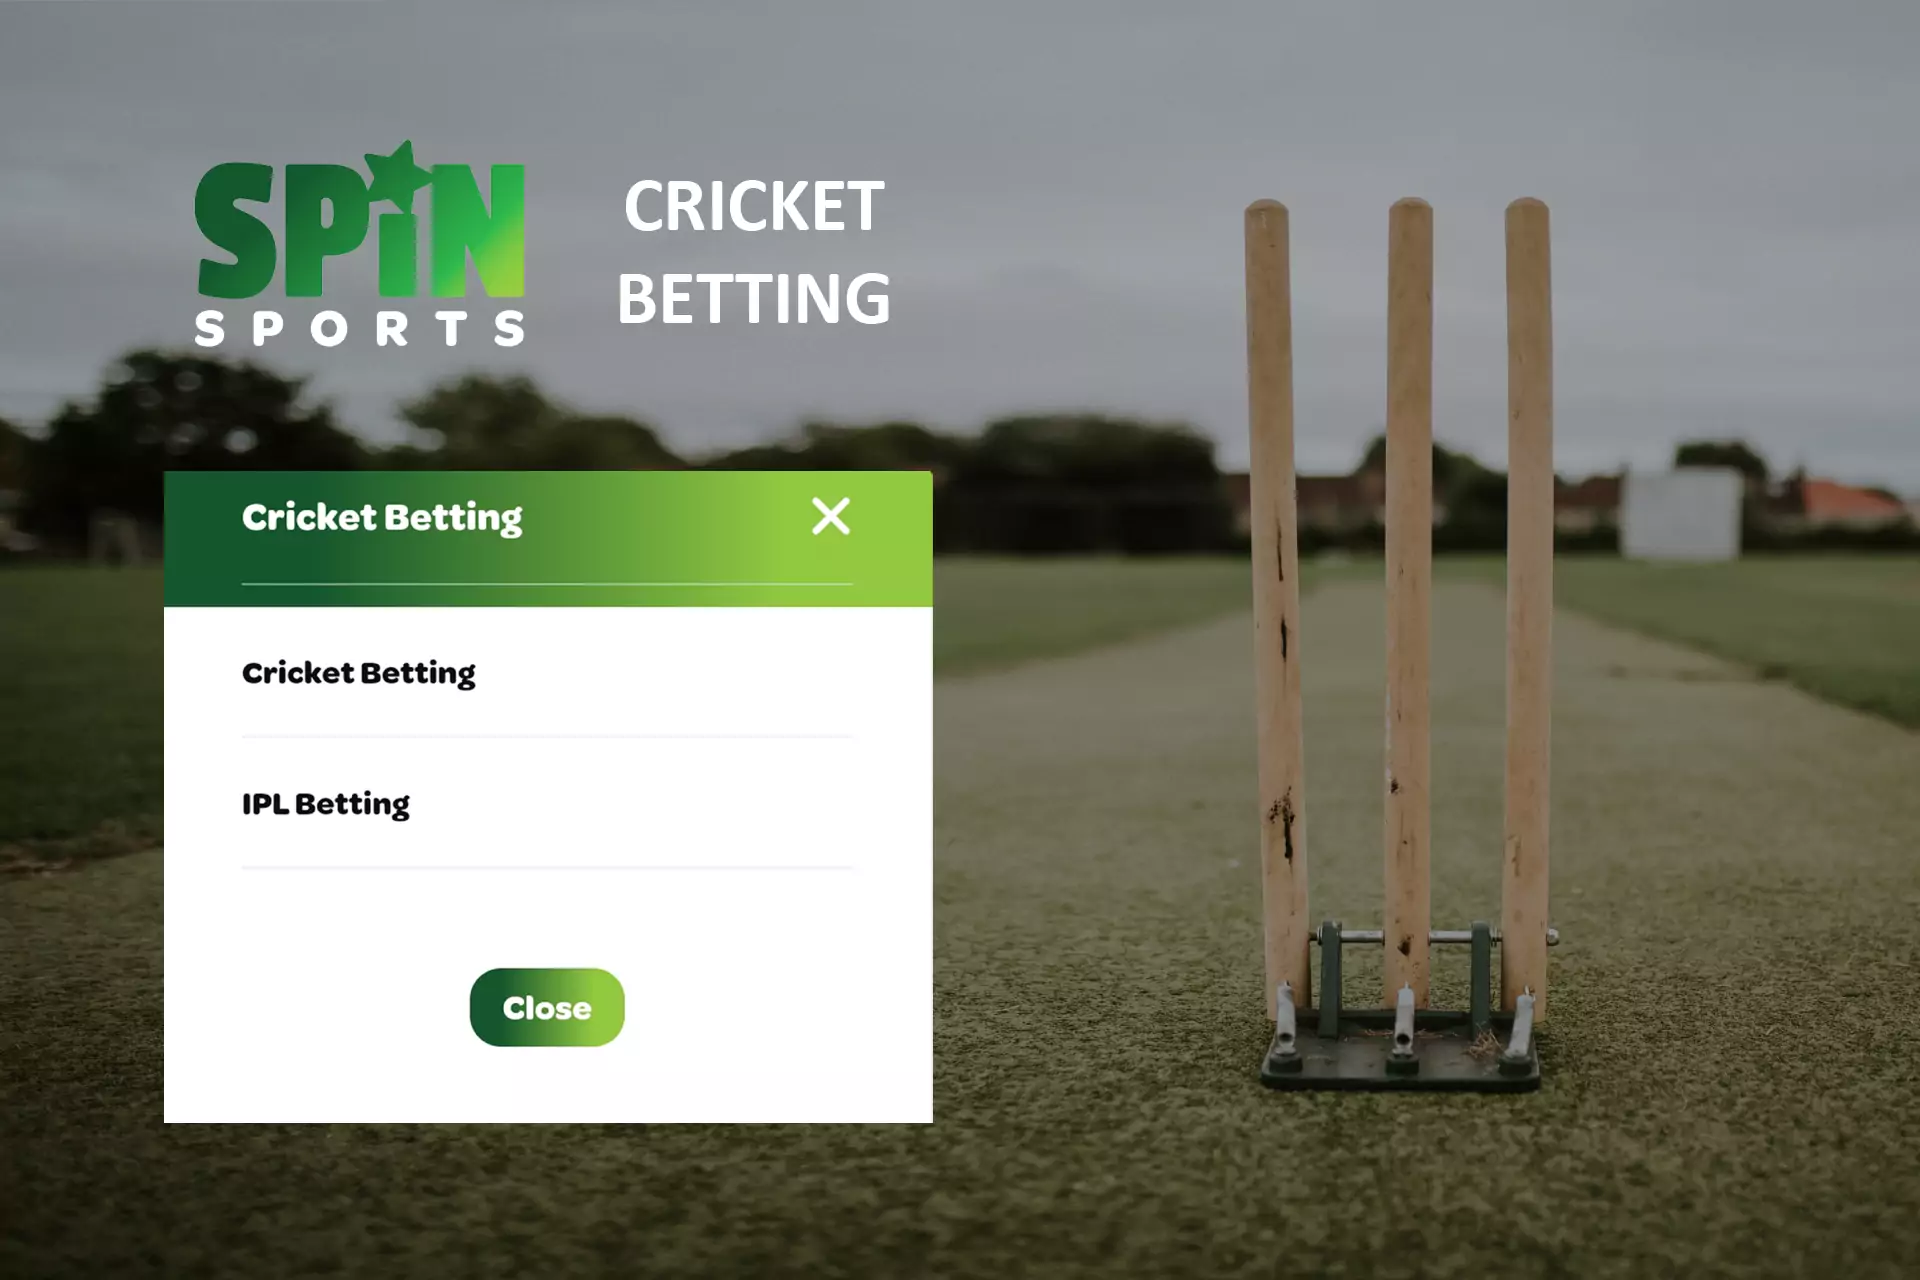 Cricket betting is the main direction of the Indian version of Spin Sports.